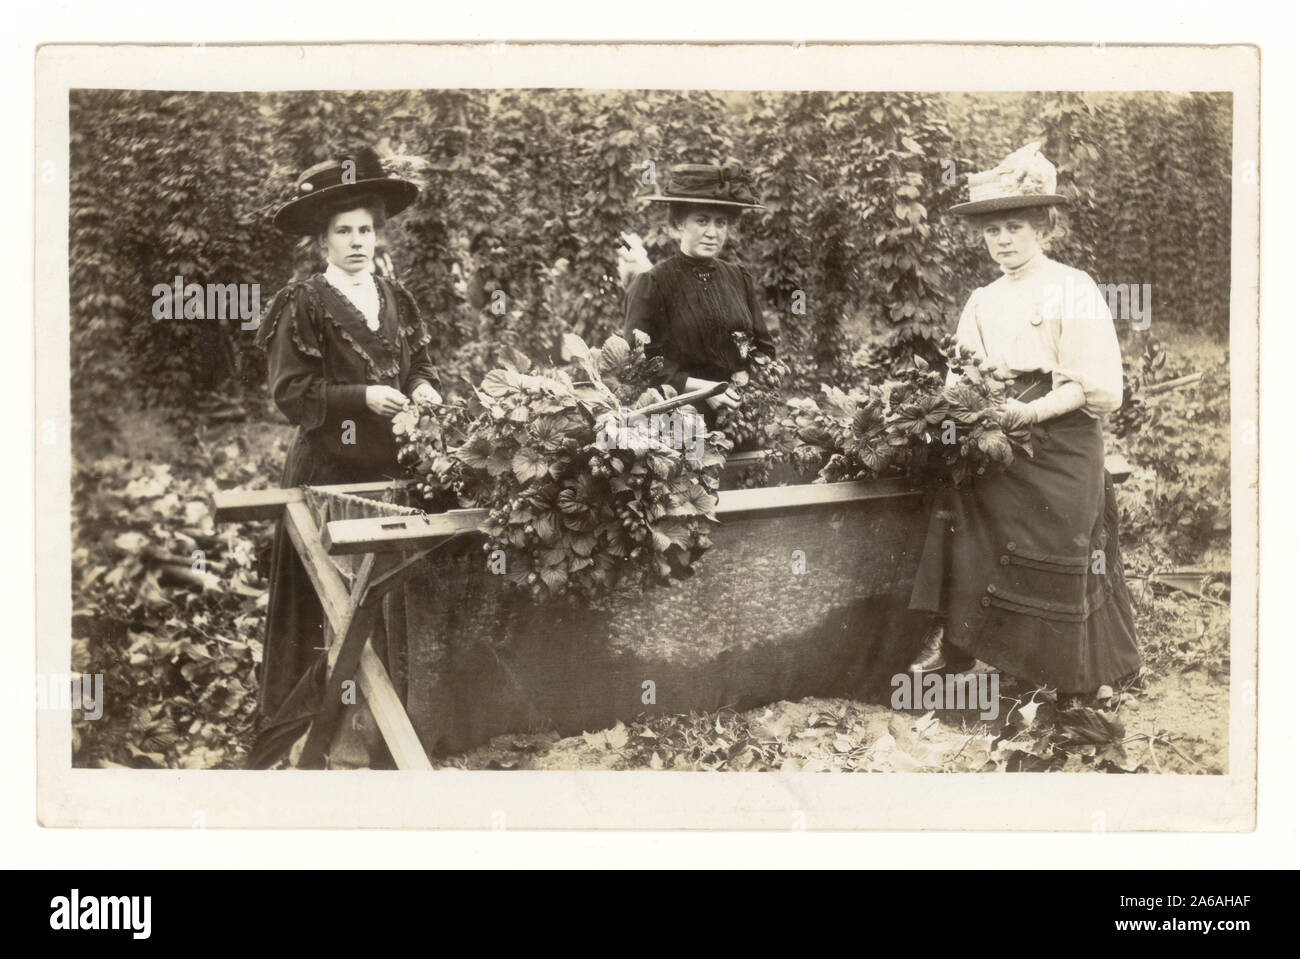 Original early 1900's postcard of hop pickers, group of 3 women wearing hats on a working hop picking holiday, putting hop 'bines' (also known as hop vines or garlands) into hop bins, posing for a photo in their Sunday best. A charming rural scene. Circa 1907, England, U.K. Stock Photo